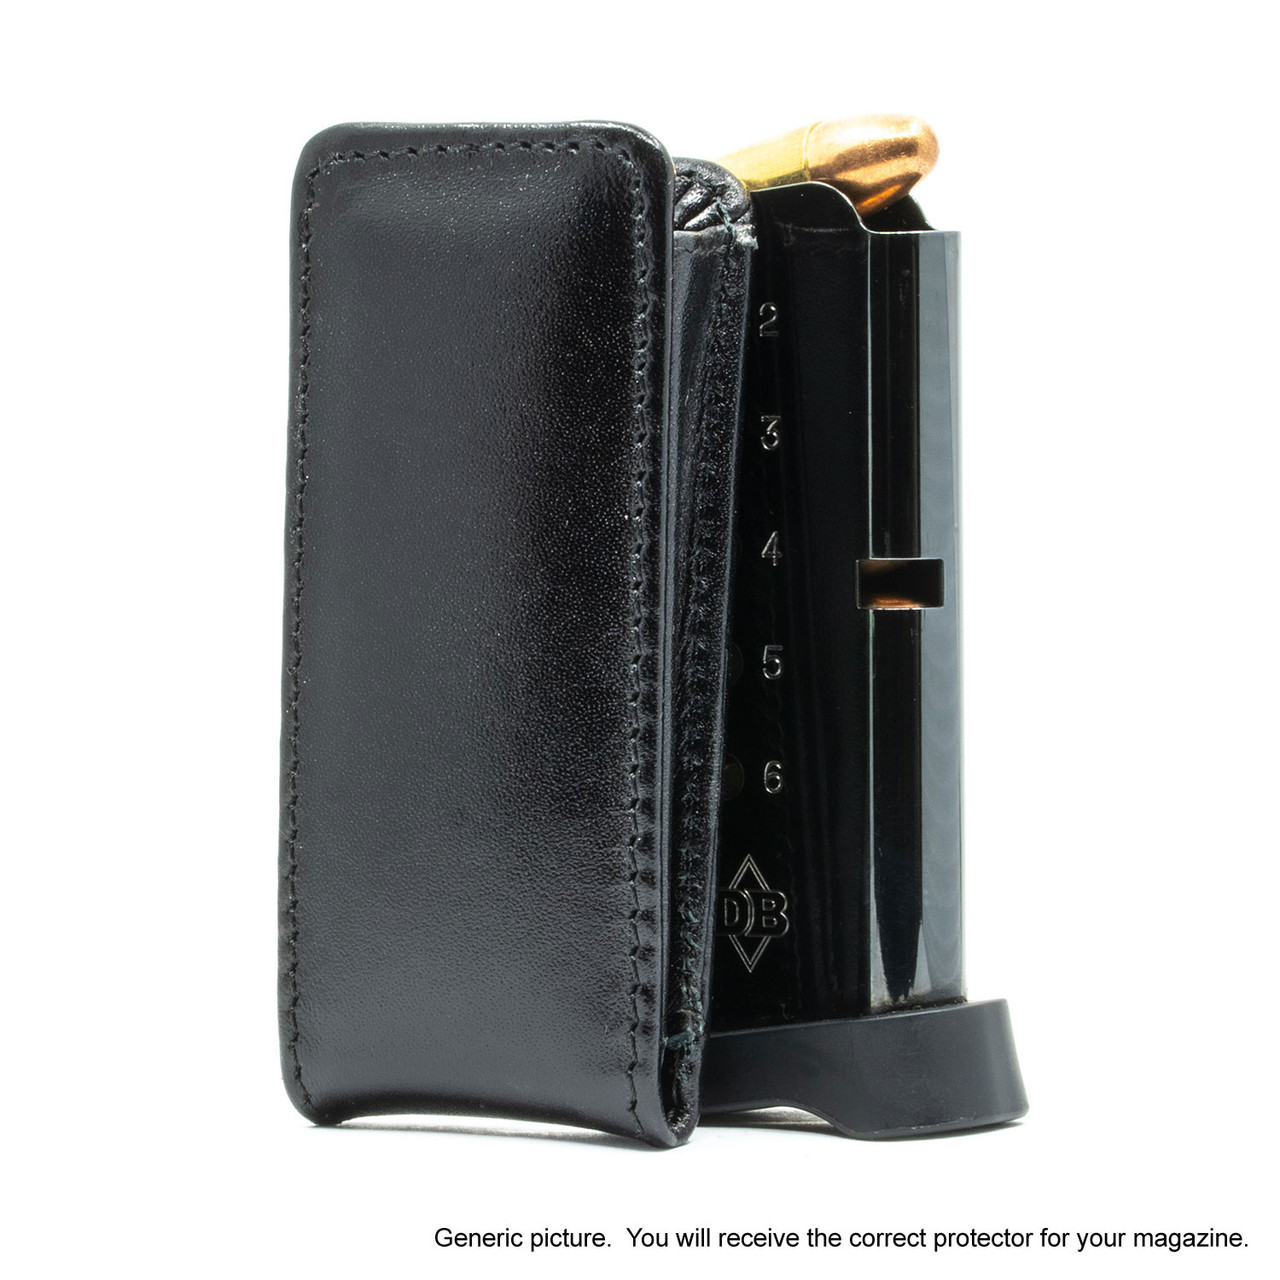 Springfield Micro Compact Black Leather Magazine Pocket Protector